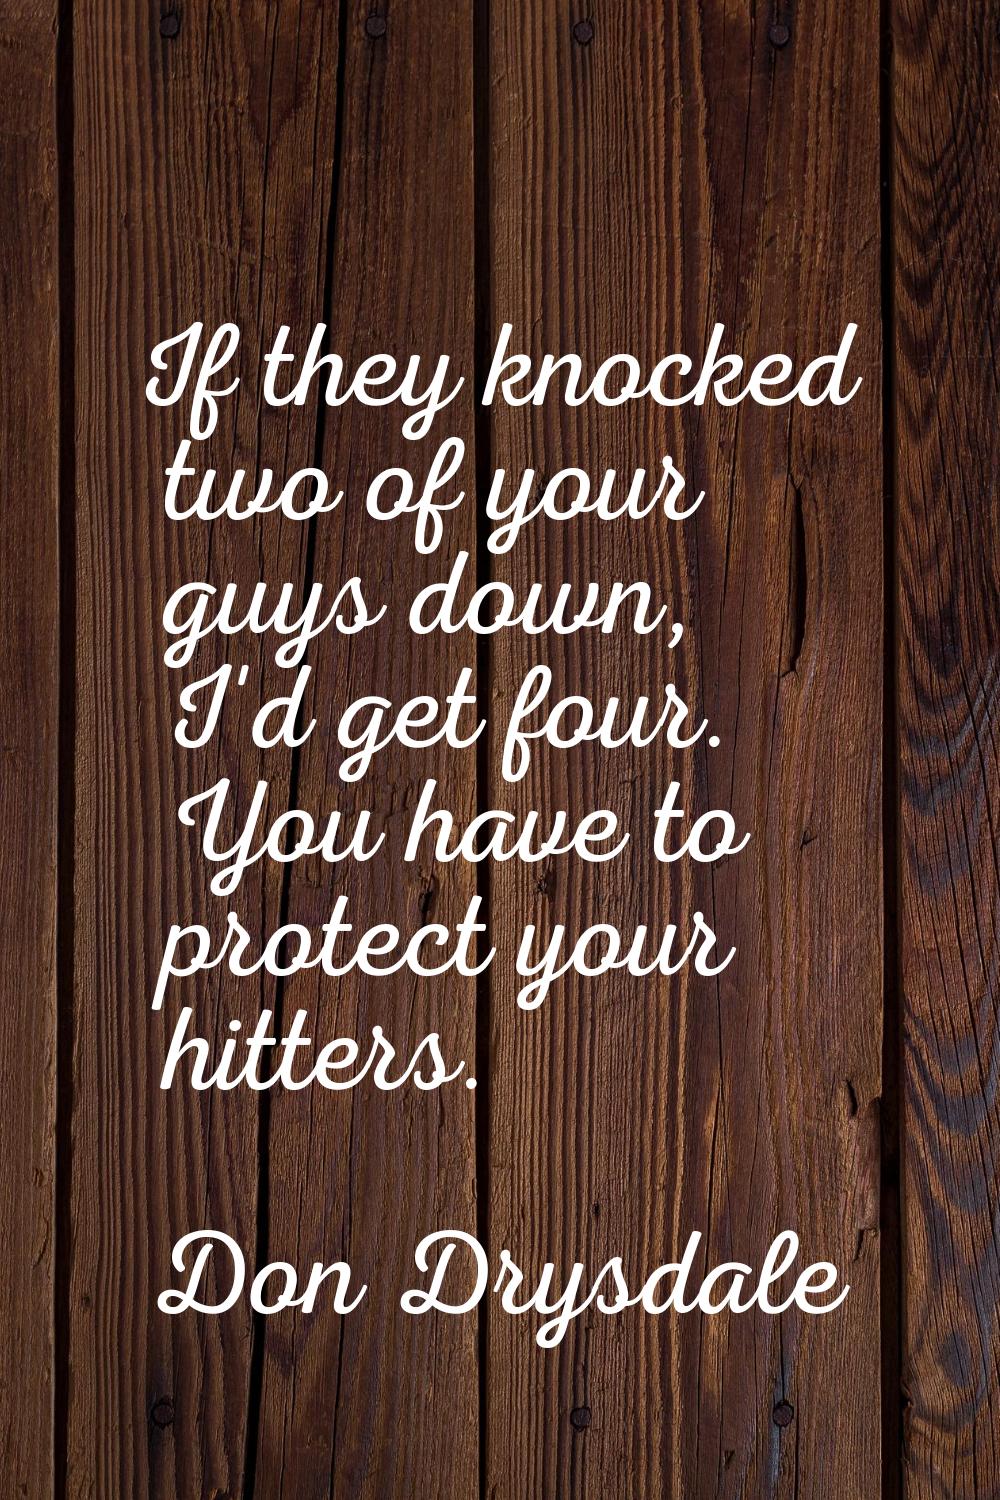 If they knocked two of your guys down, I'd get four. You have to protect your hitters.